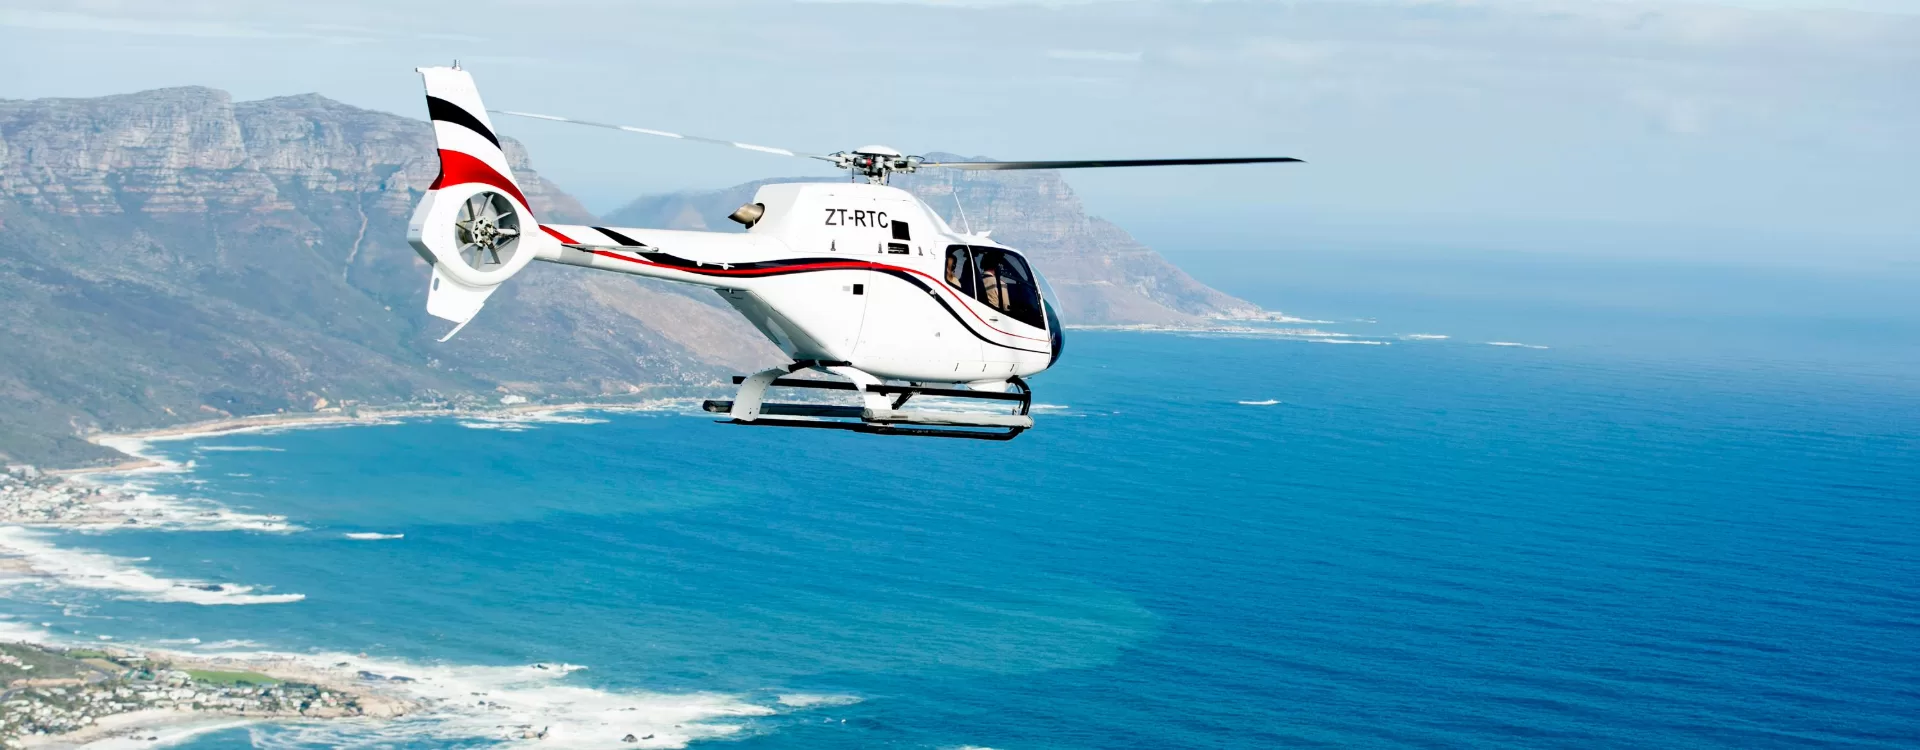 How To Book Cape Town Helicopter Ride